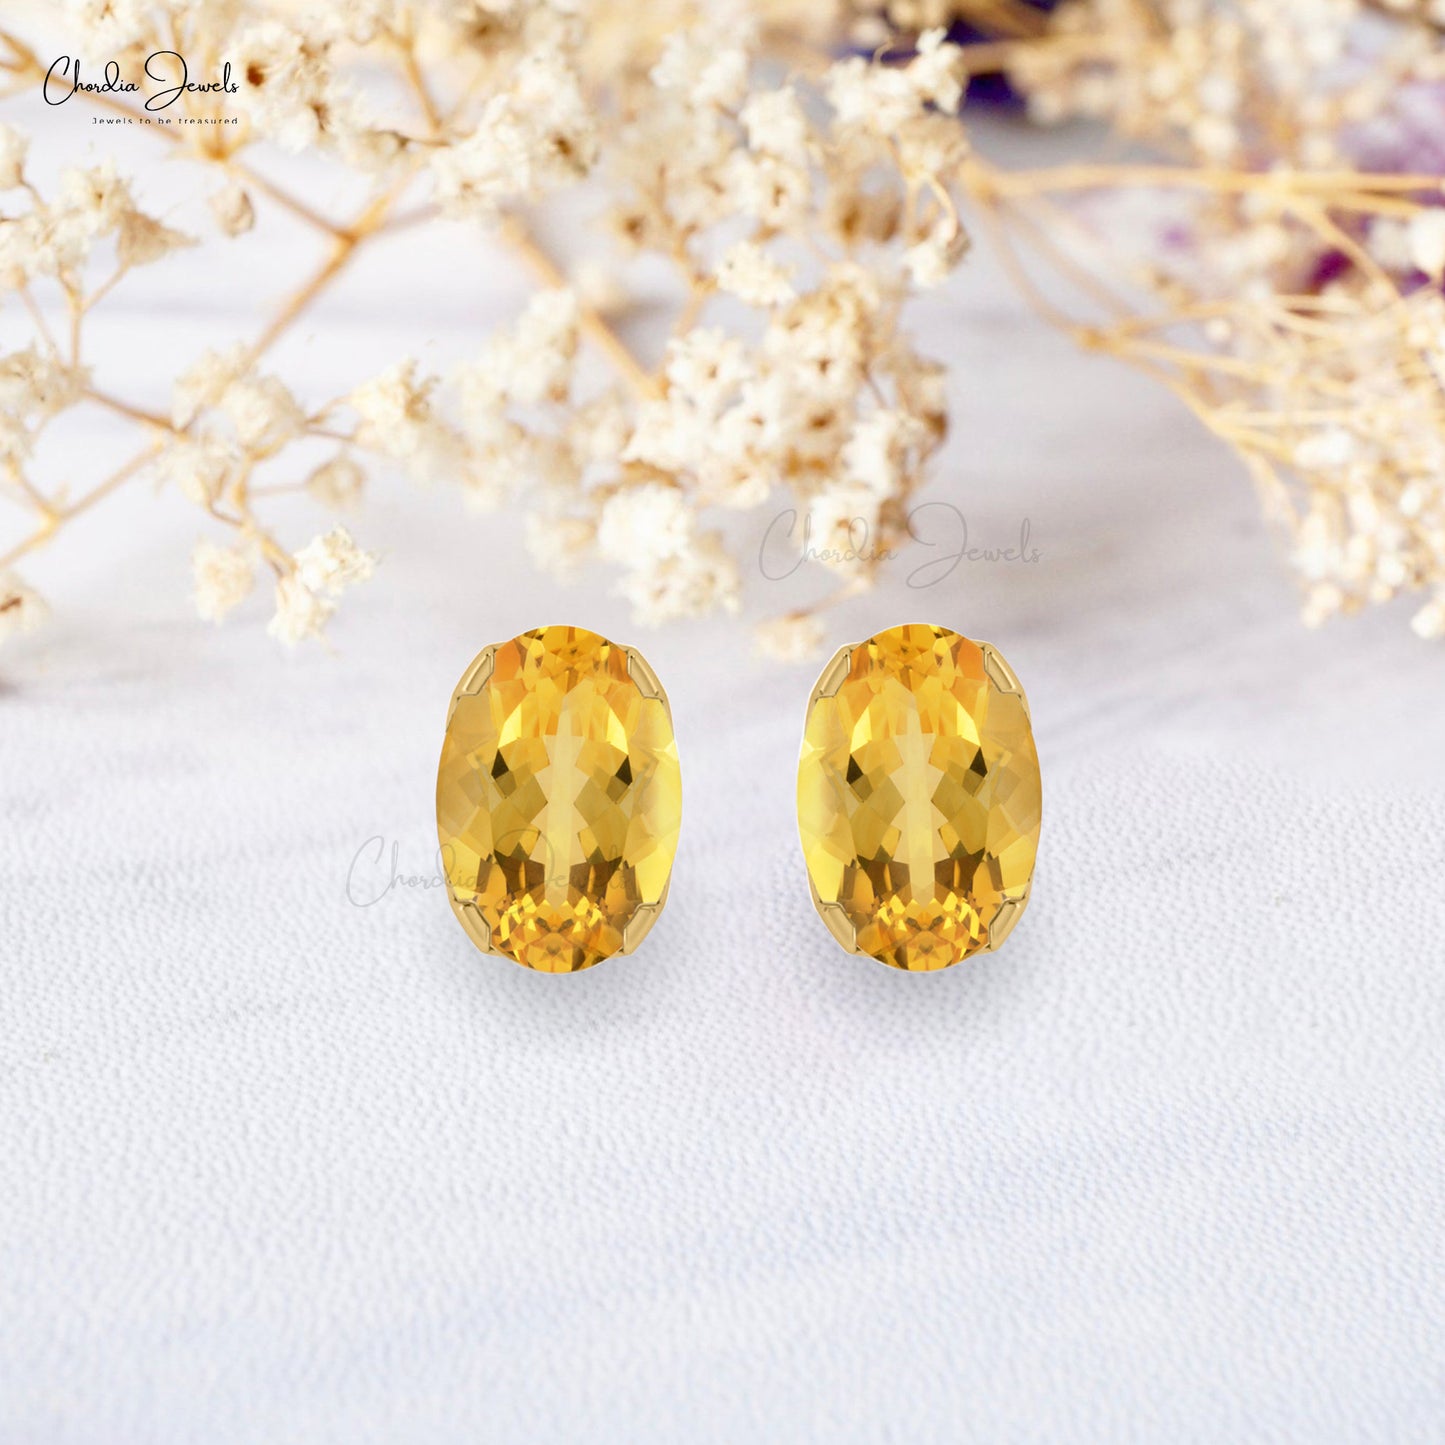 Yellow Citrine Solitaire Earrings 6x4mm Oval Cut Gemstone Minimalist Studs Genuine 14k Real Gold Fine Jewelry For Graduation Gift